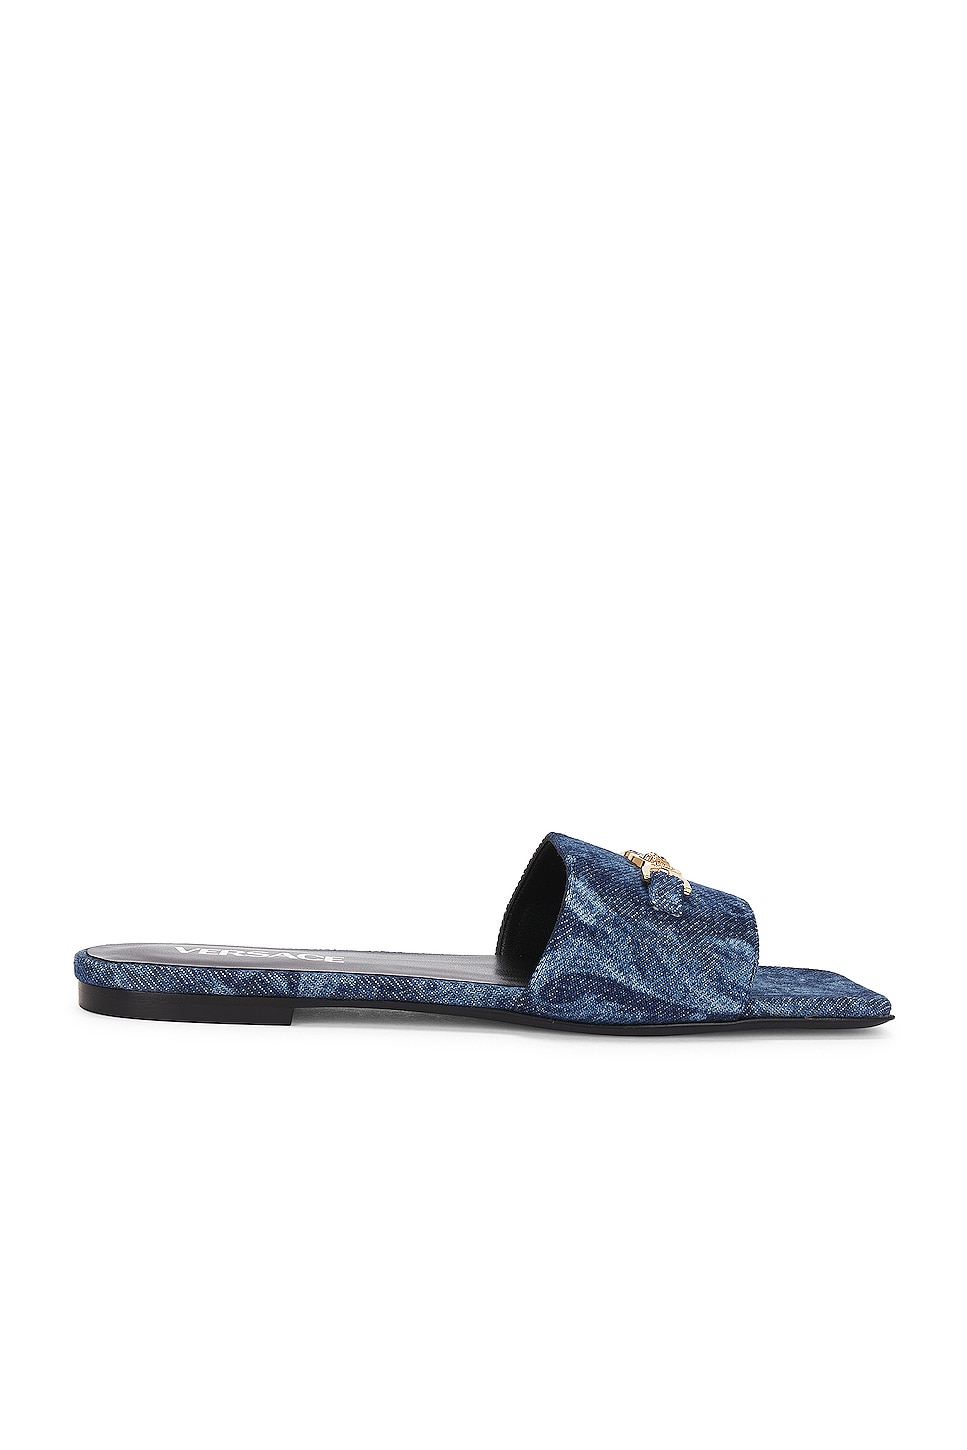 Image 1 of VERSACE Fabric Mule Slides in Blue